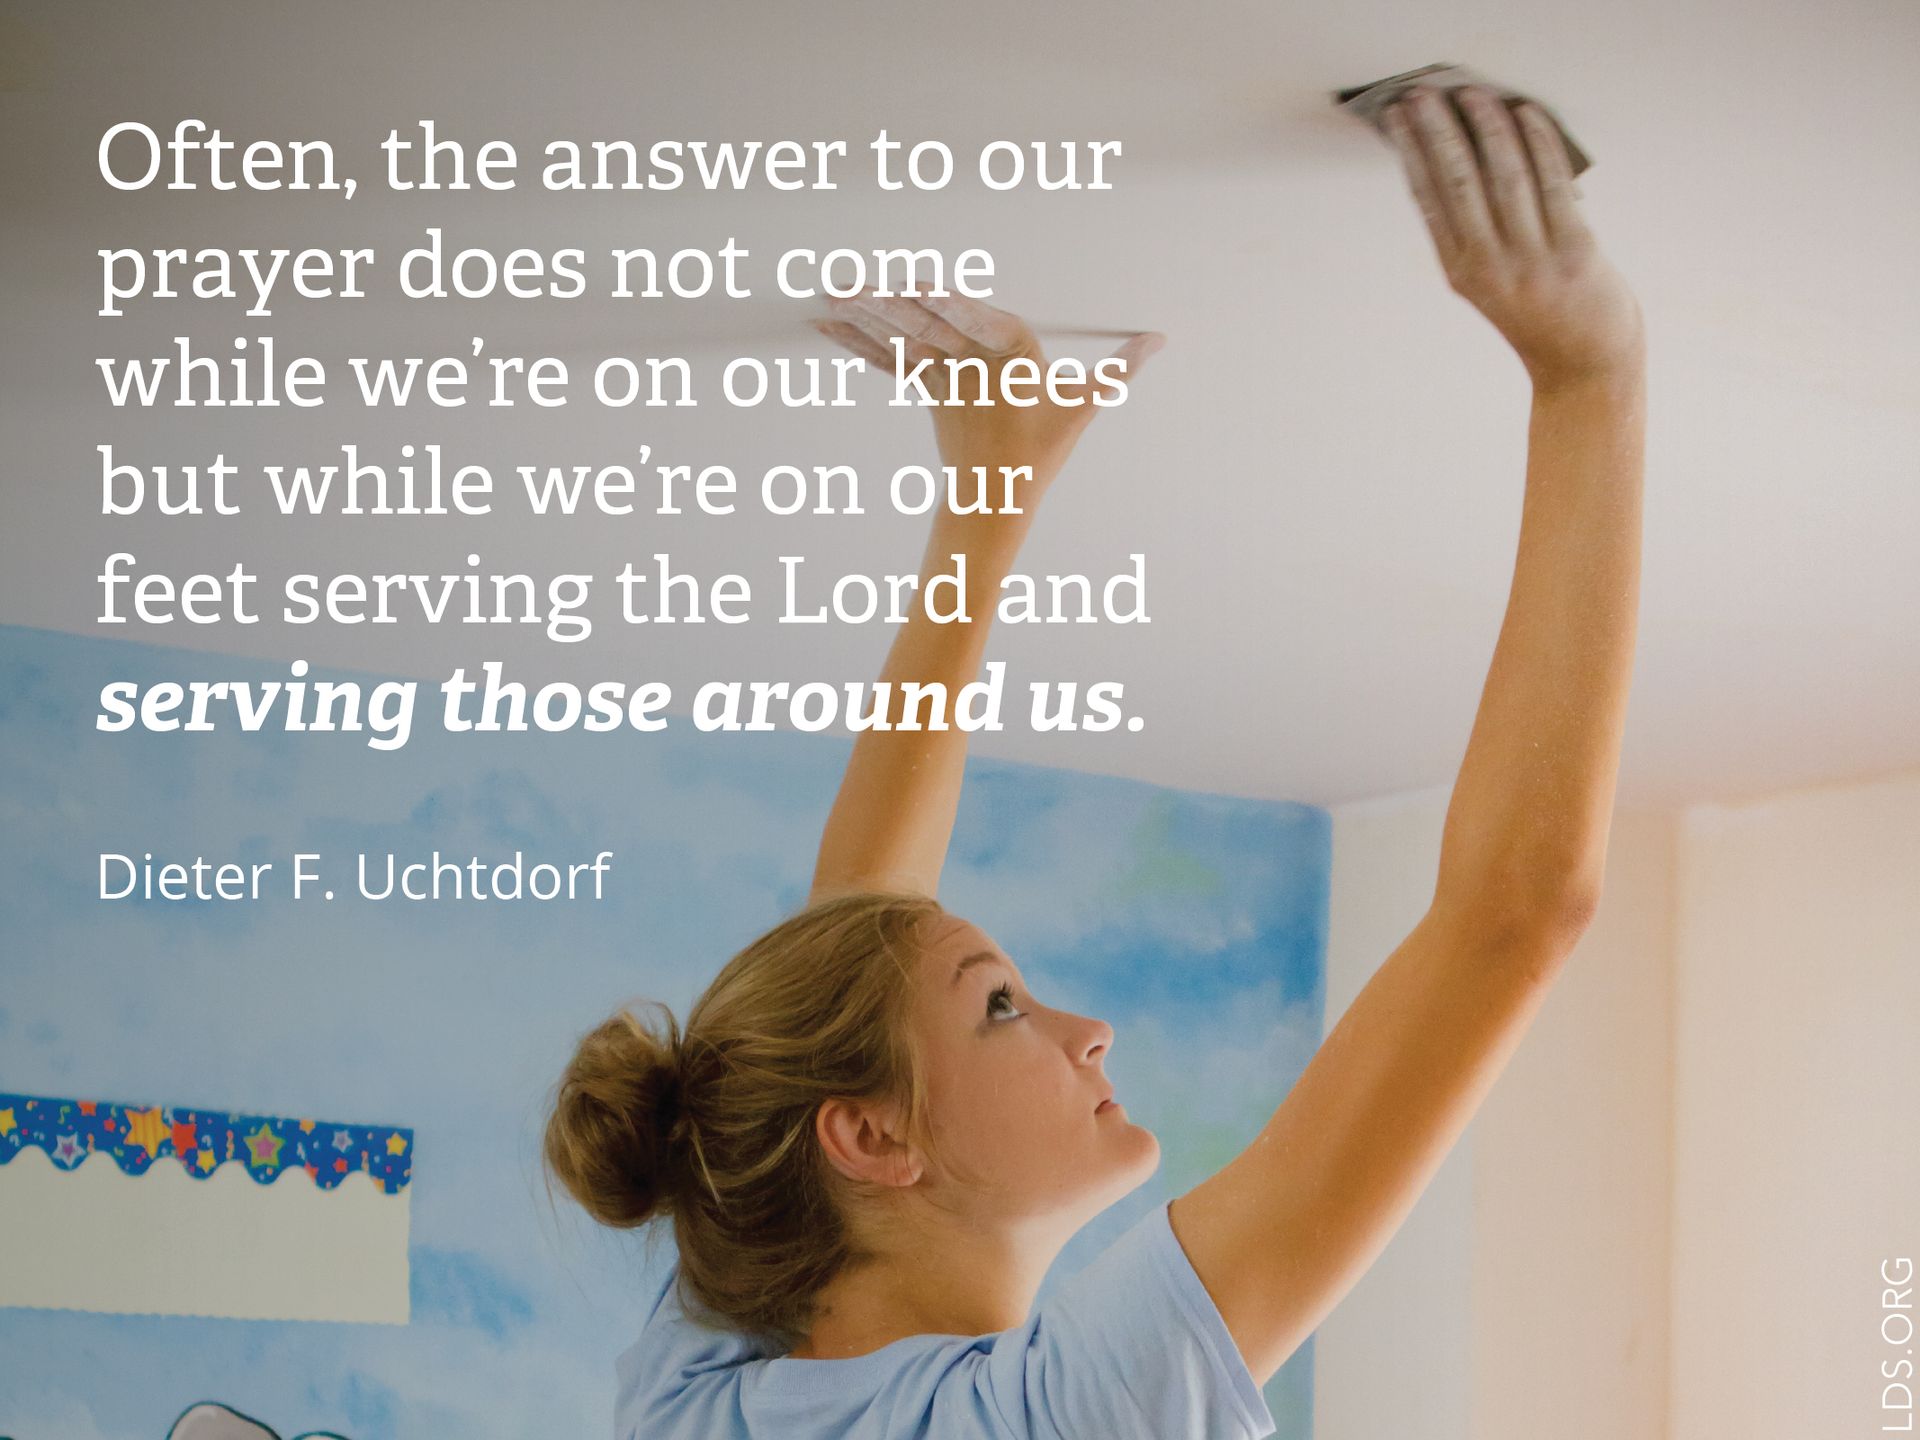 “Often, the answer to our prayer does not come while we’re on our knees but while we’re on our feet serving the Lord and serving those around us.”—President Dieter F. Uchtdorf, “Waiting on the Road to Damascus”